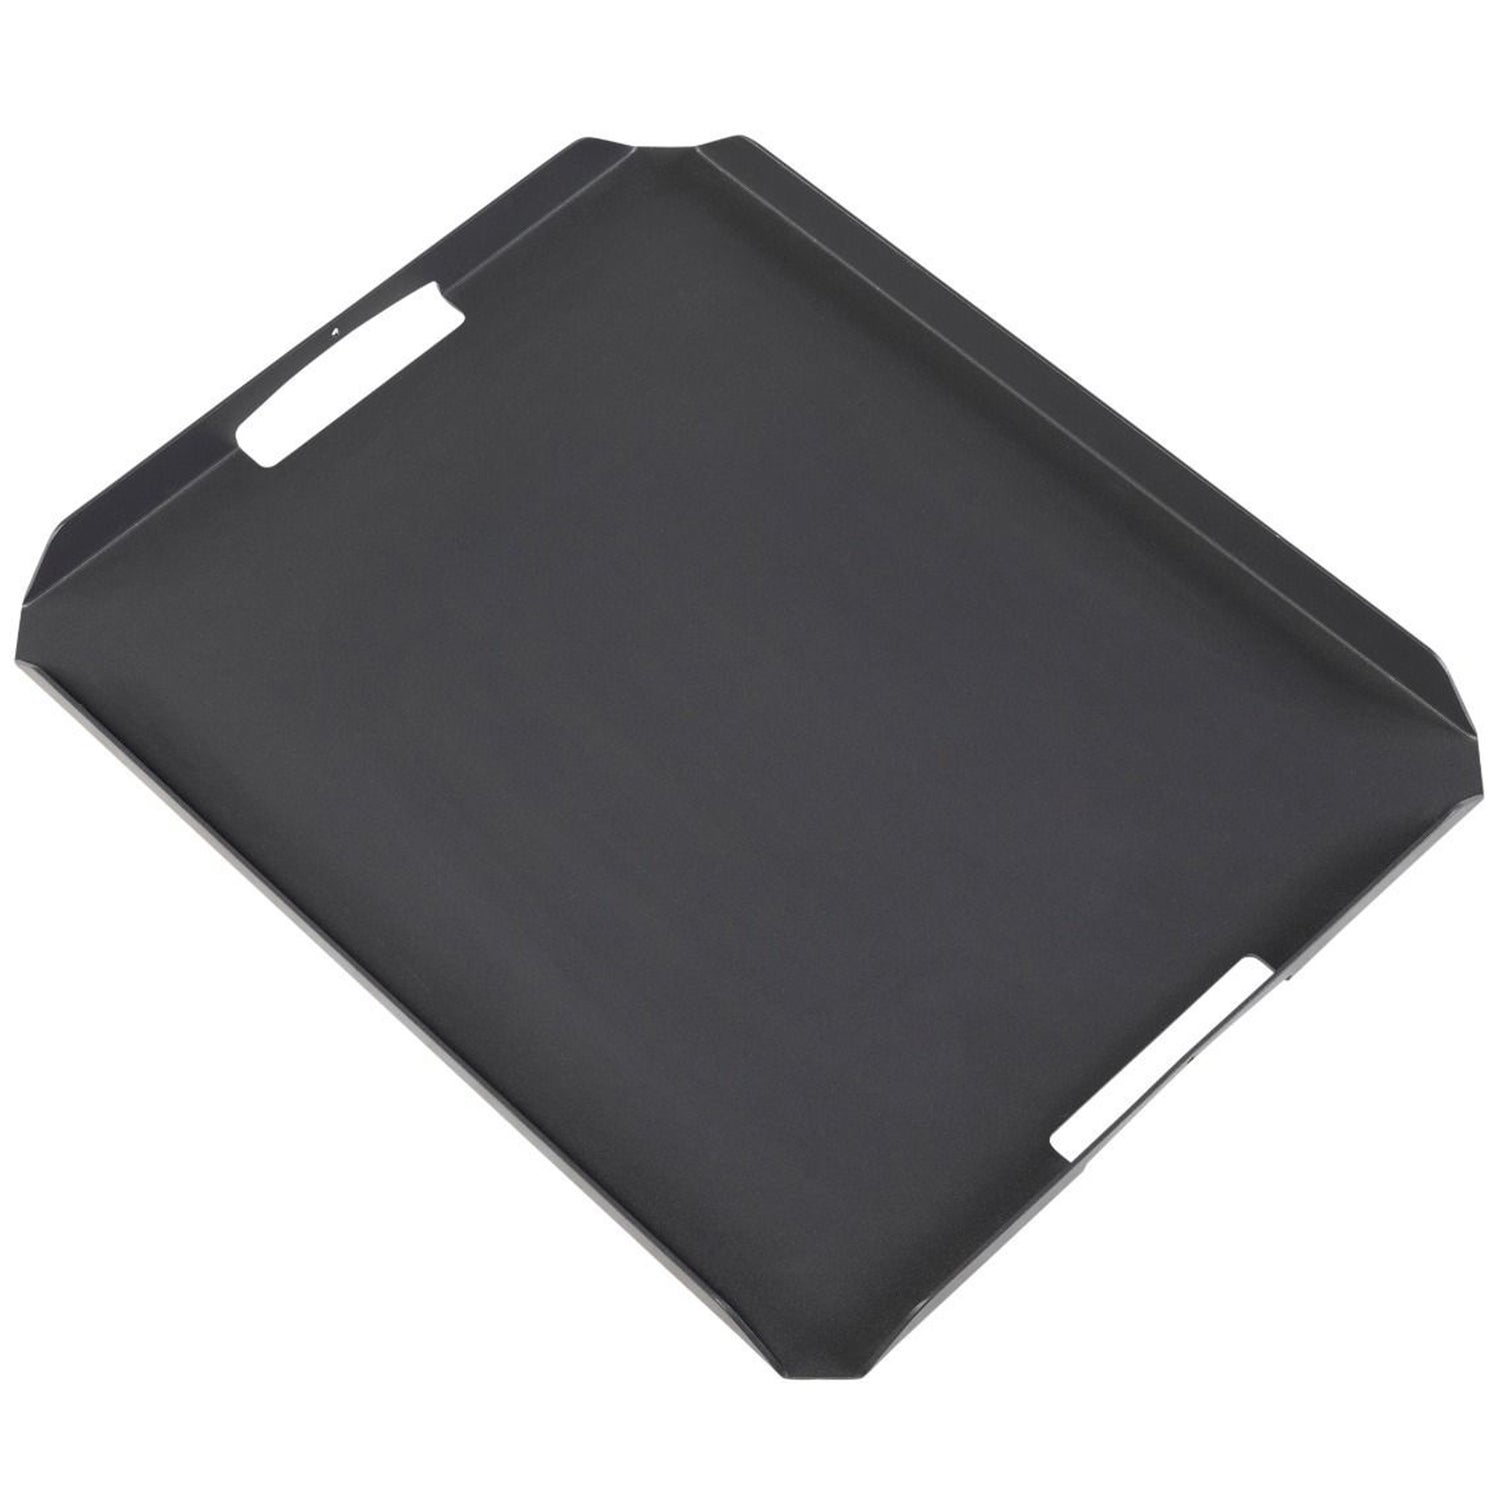 CH220ATRAY-01_VS_EXT_Serving_tray_antraciet_50x40cm_SA.jpg?auto=webp&format=png&width=1500&height=1500